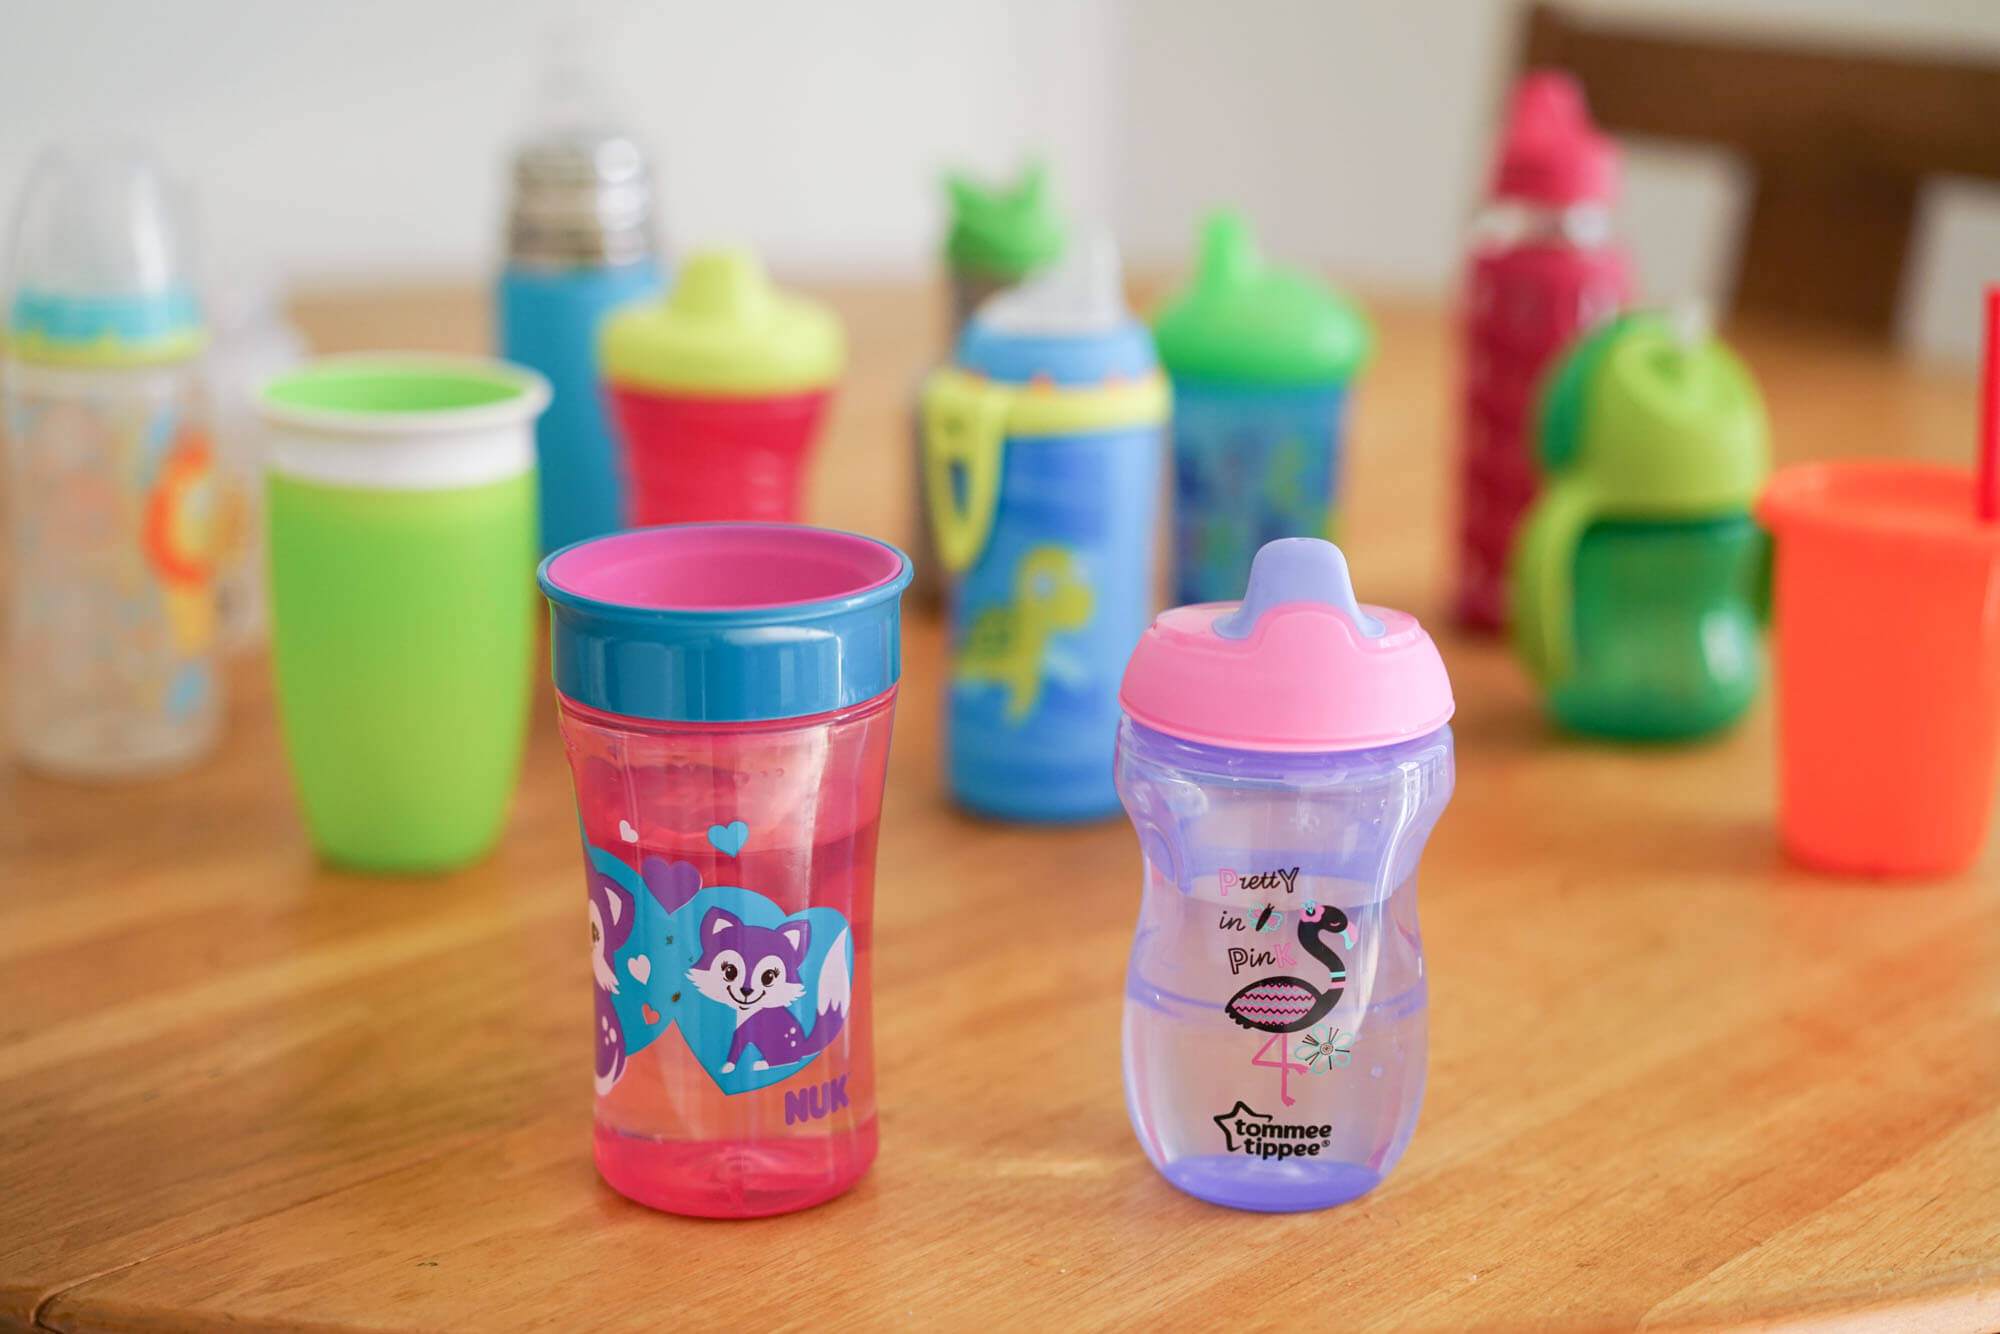 https://www.yourbestdigs.com/wp-content/uploads/2018/04/the-best-sippy-cups-group.jpg